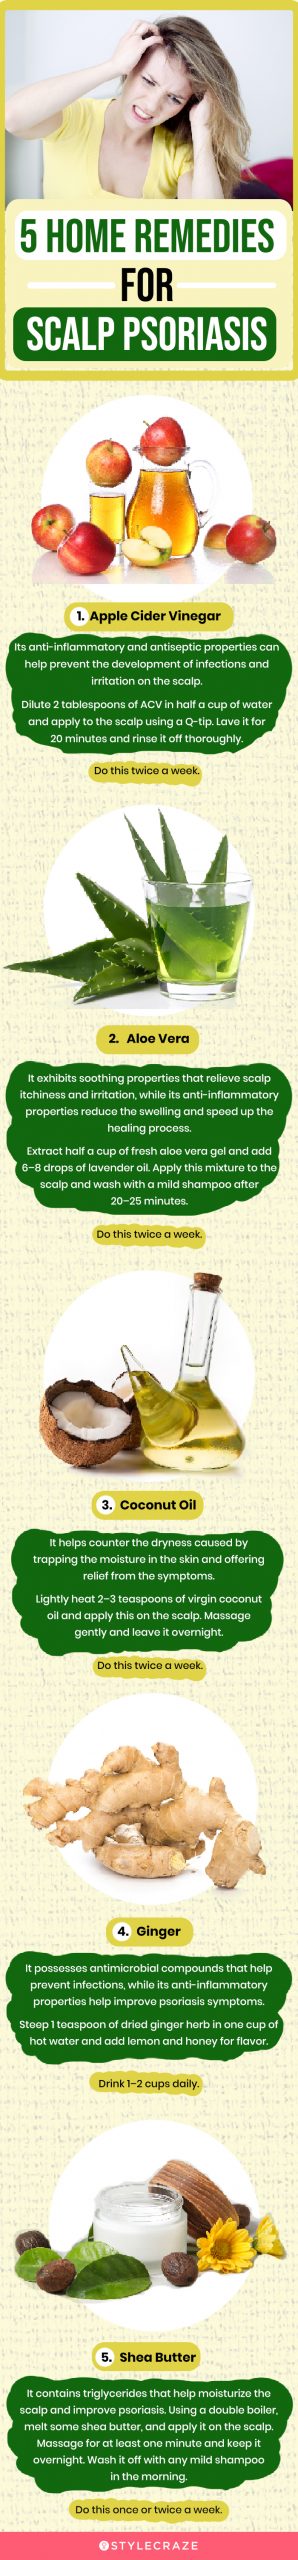 5 home remedies for scalp psoriasis (infographic)